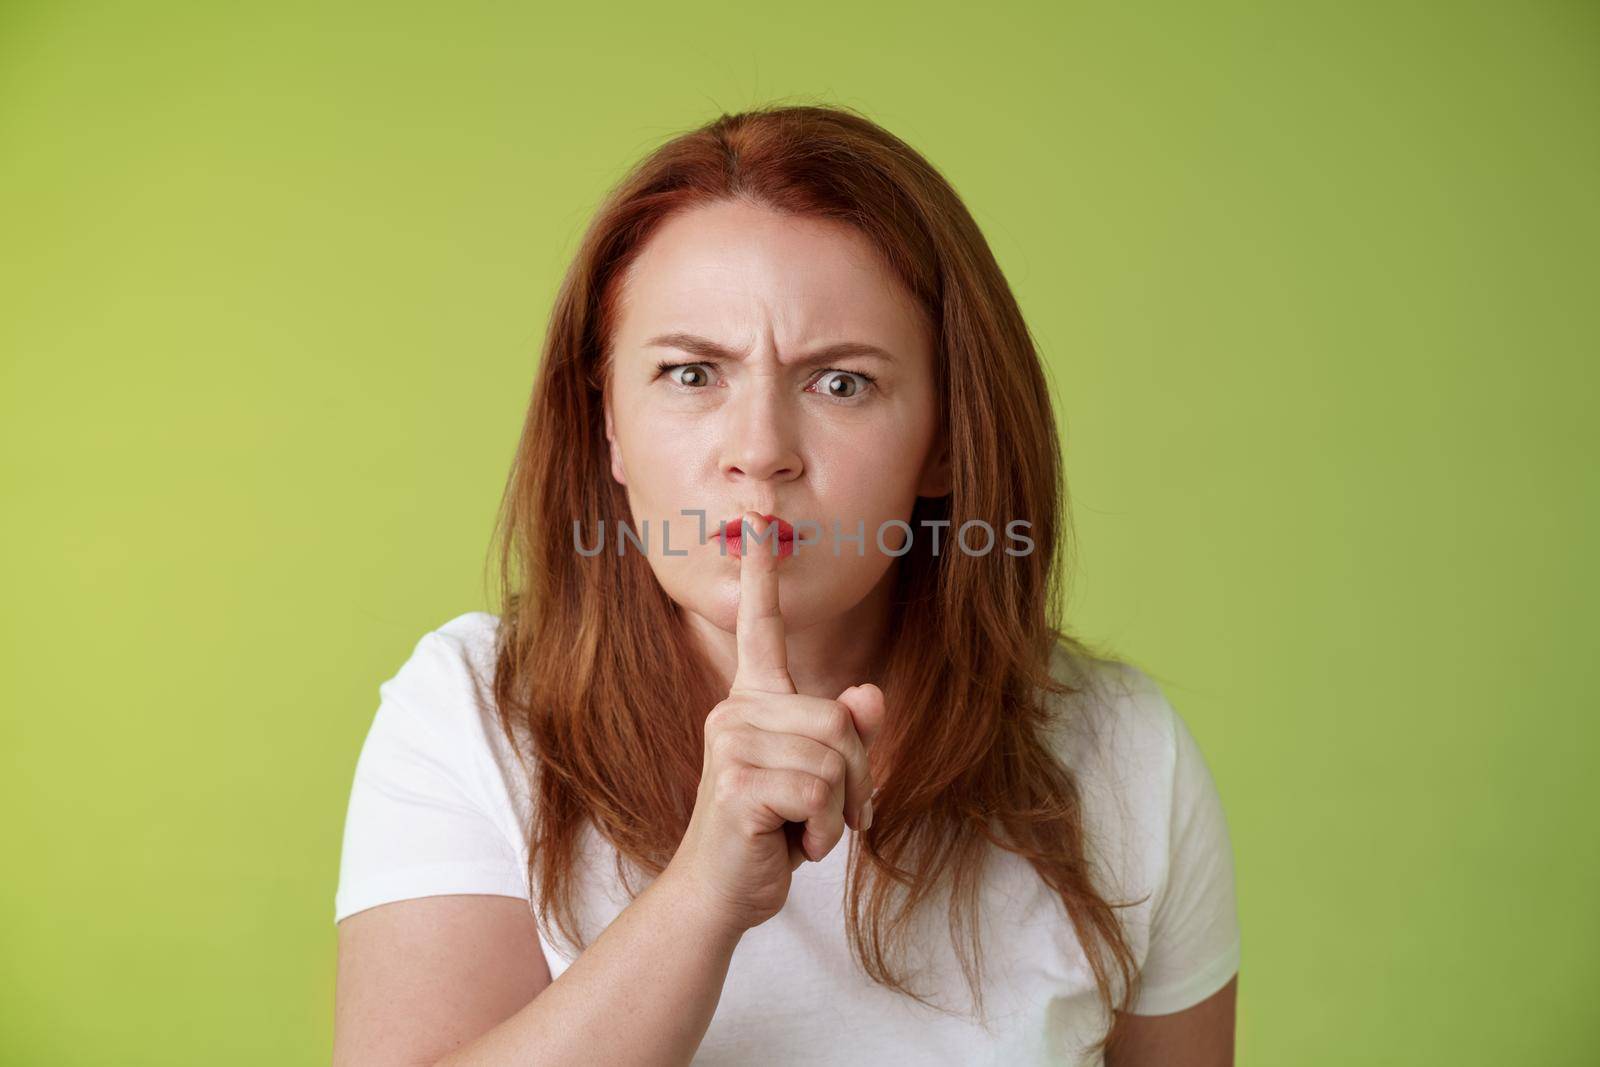 Not speak during exam. Strict serious-looking displeased middle-aged redhead woman frowning disappointed hushing say shush index finger pressed lips keep quiet gesture green background by Benzoix